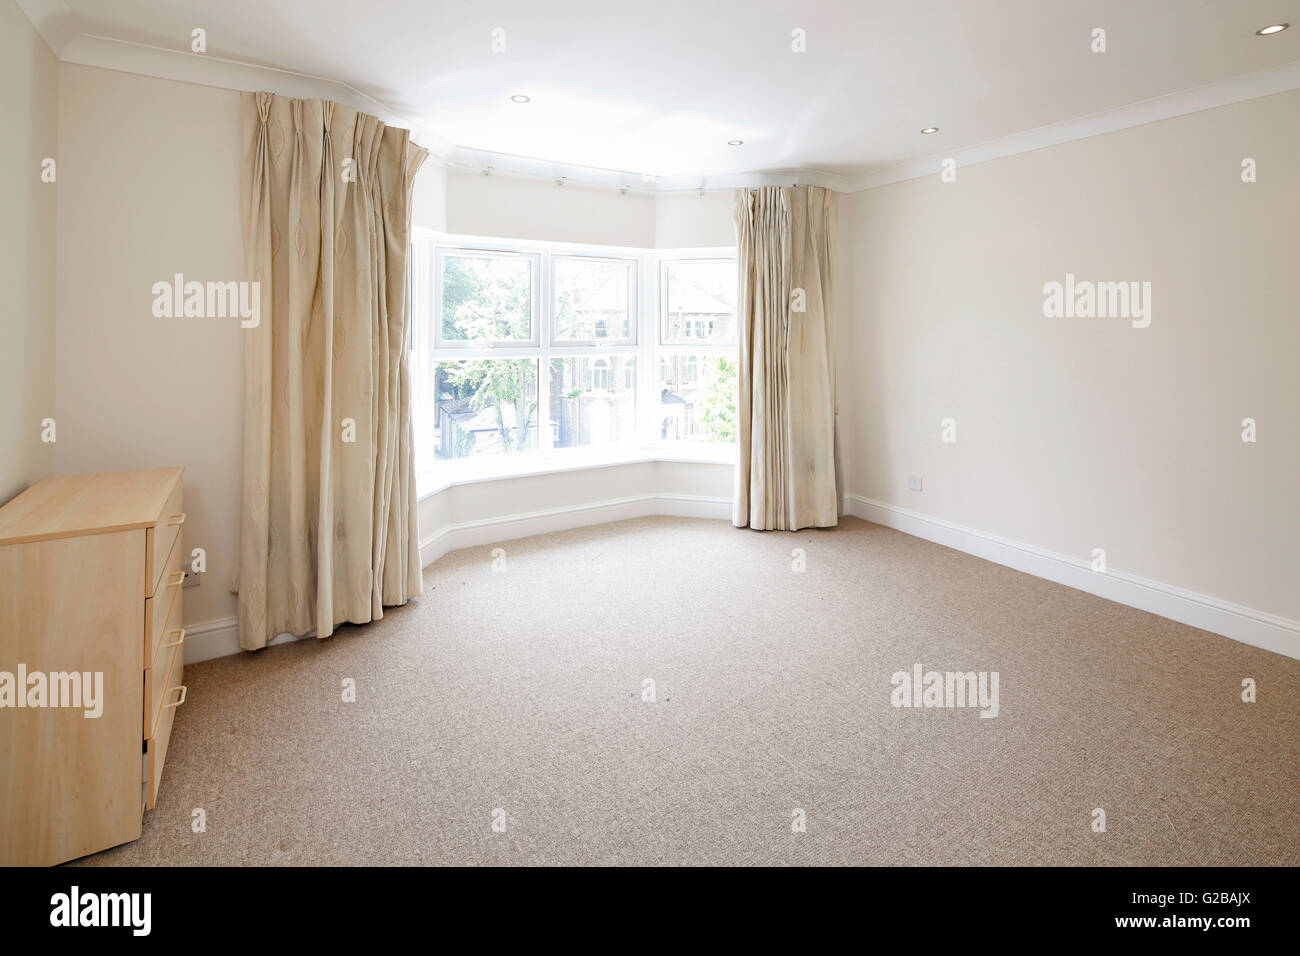 Pavilion Court, Hampstead. View of an empty room apart from a dresser. Large windows with pulled back curtains. Stock Photo